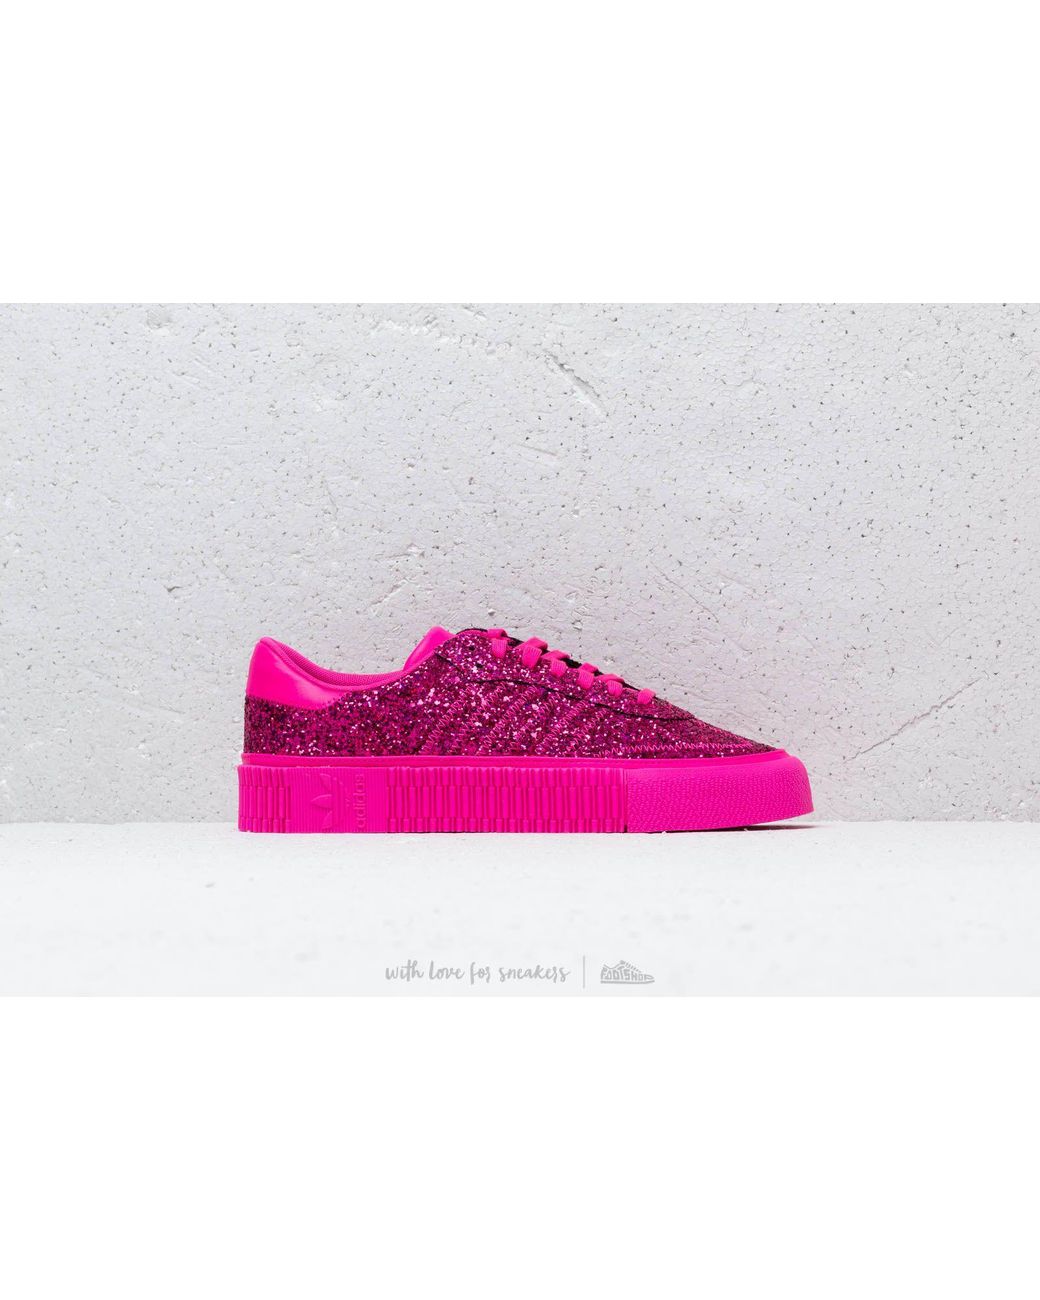 Chaiselong Thriller Transportere adidas Originals Sambarose Shoes in Pink | Lyst